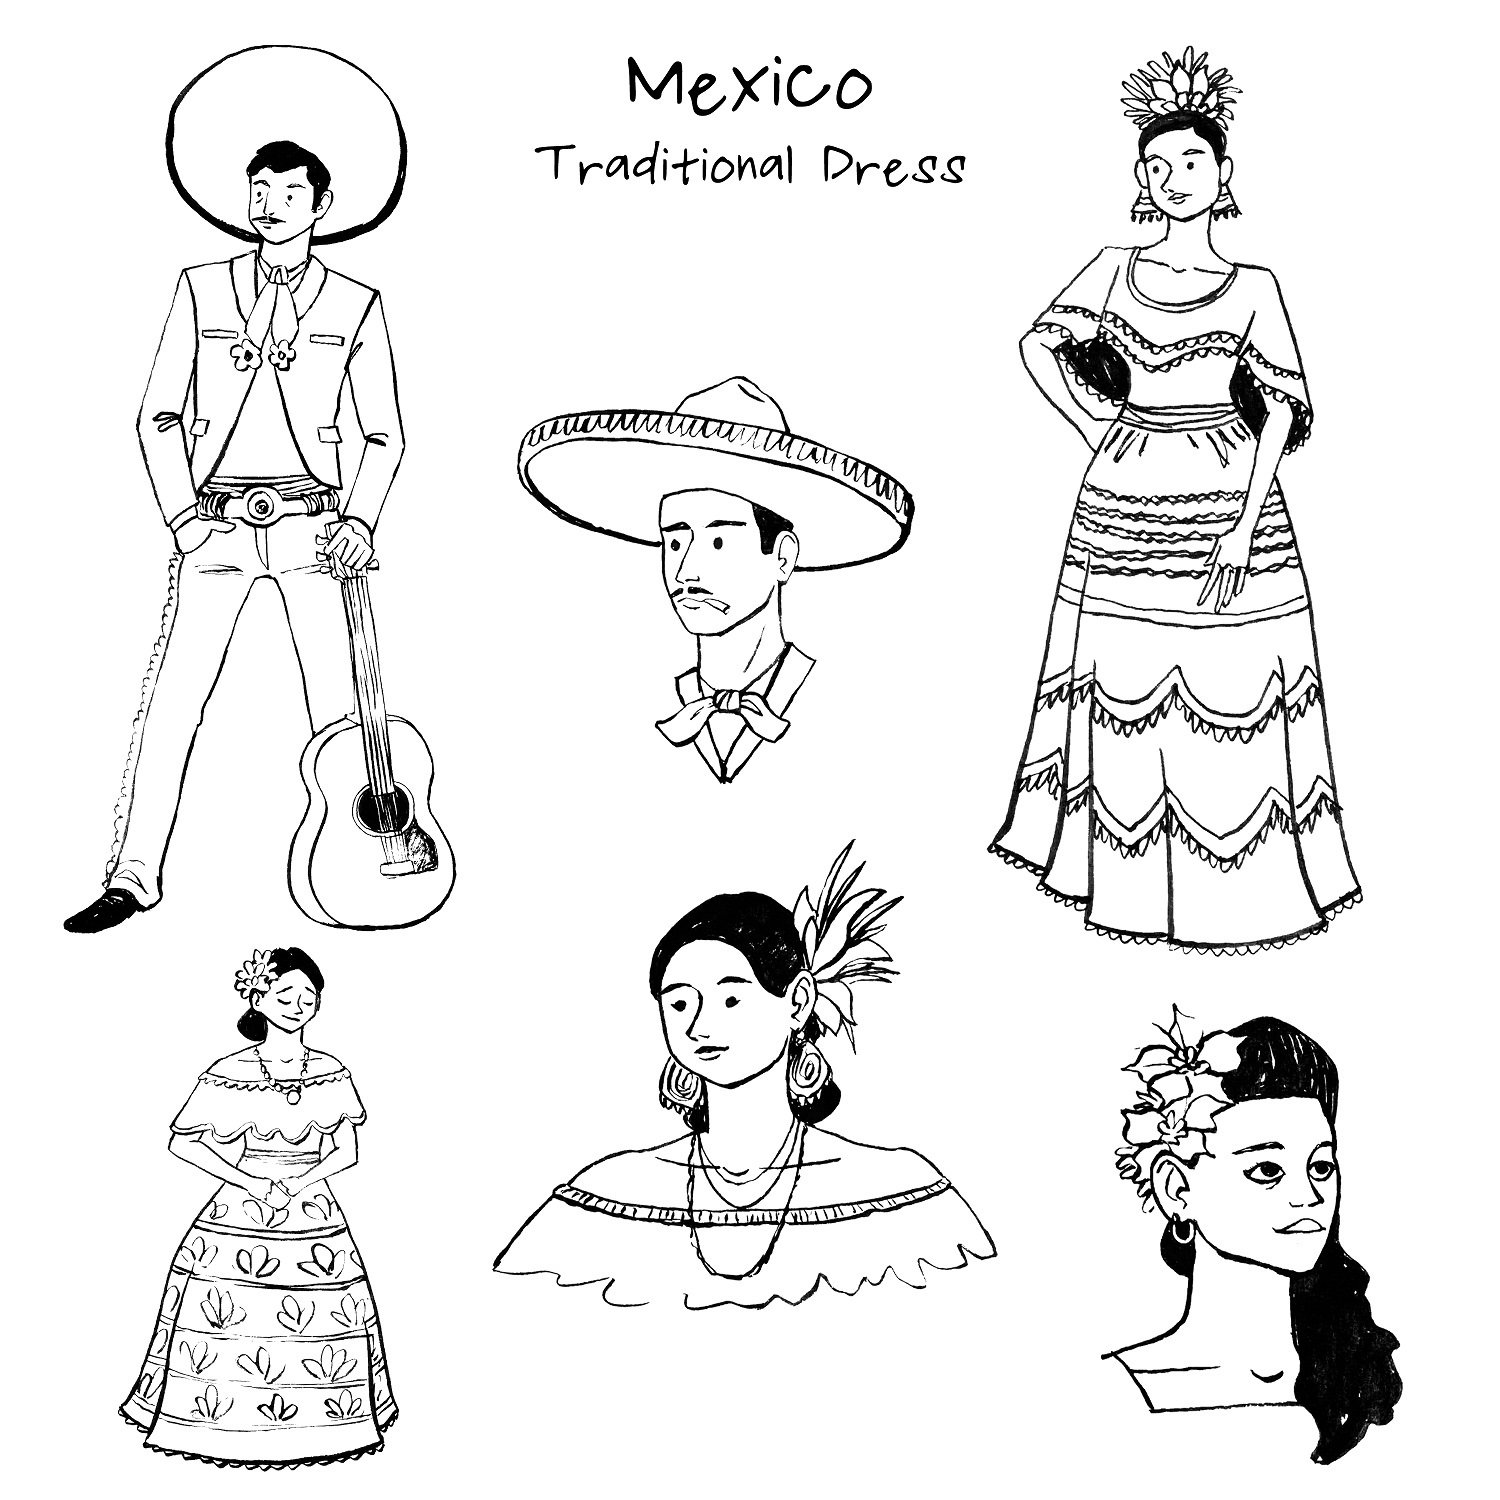 Mexican Men and Women Ink Illustrations